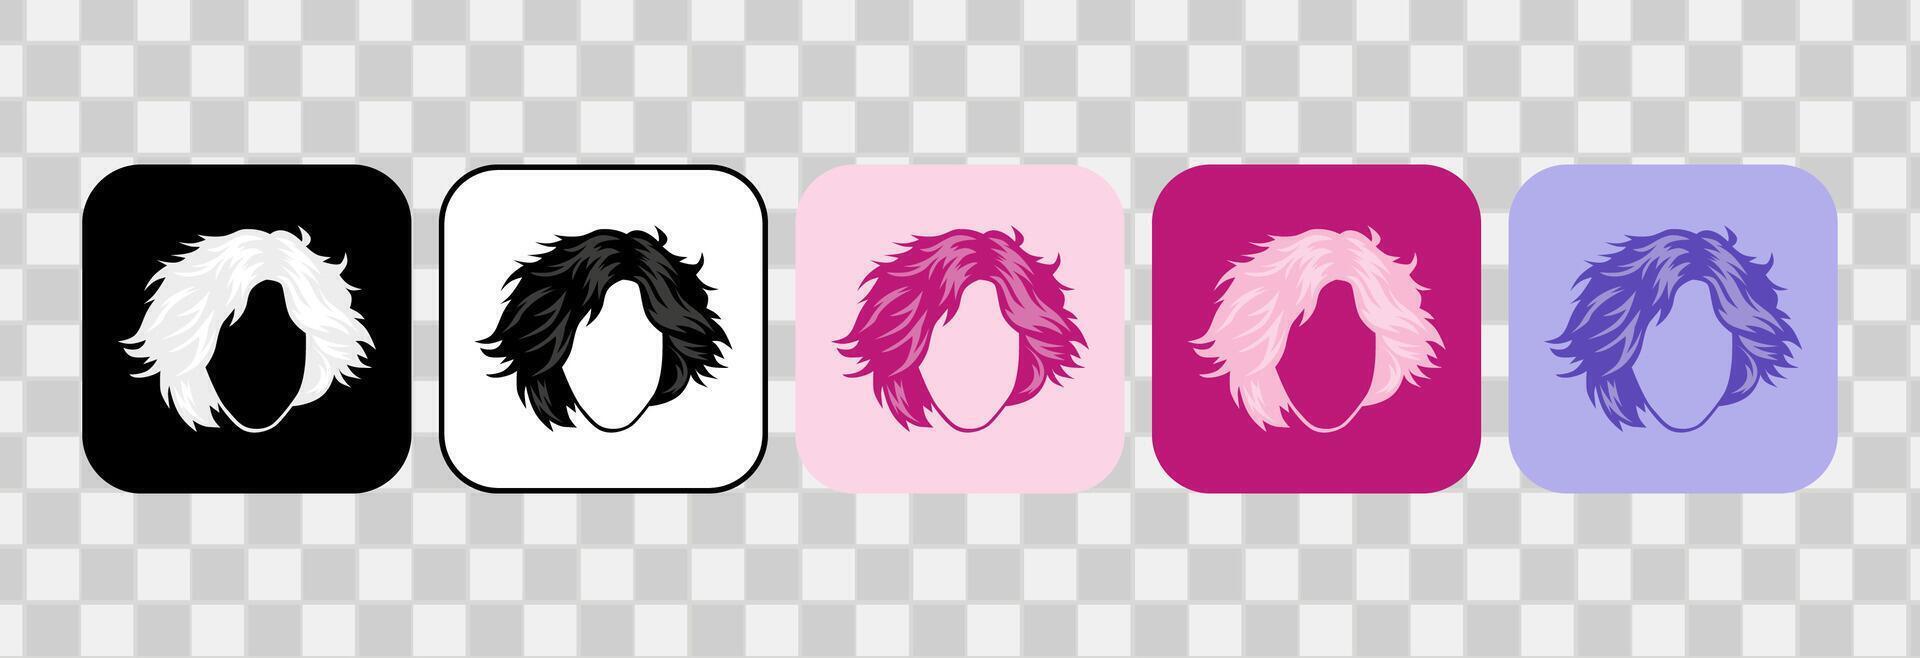 Set of women hair icons. Silhouette handdrawn outline. For logotype, clip art, symbol, sticker, or web design. 600 px X 600 px rectangular icon, vector flat illustration.